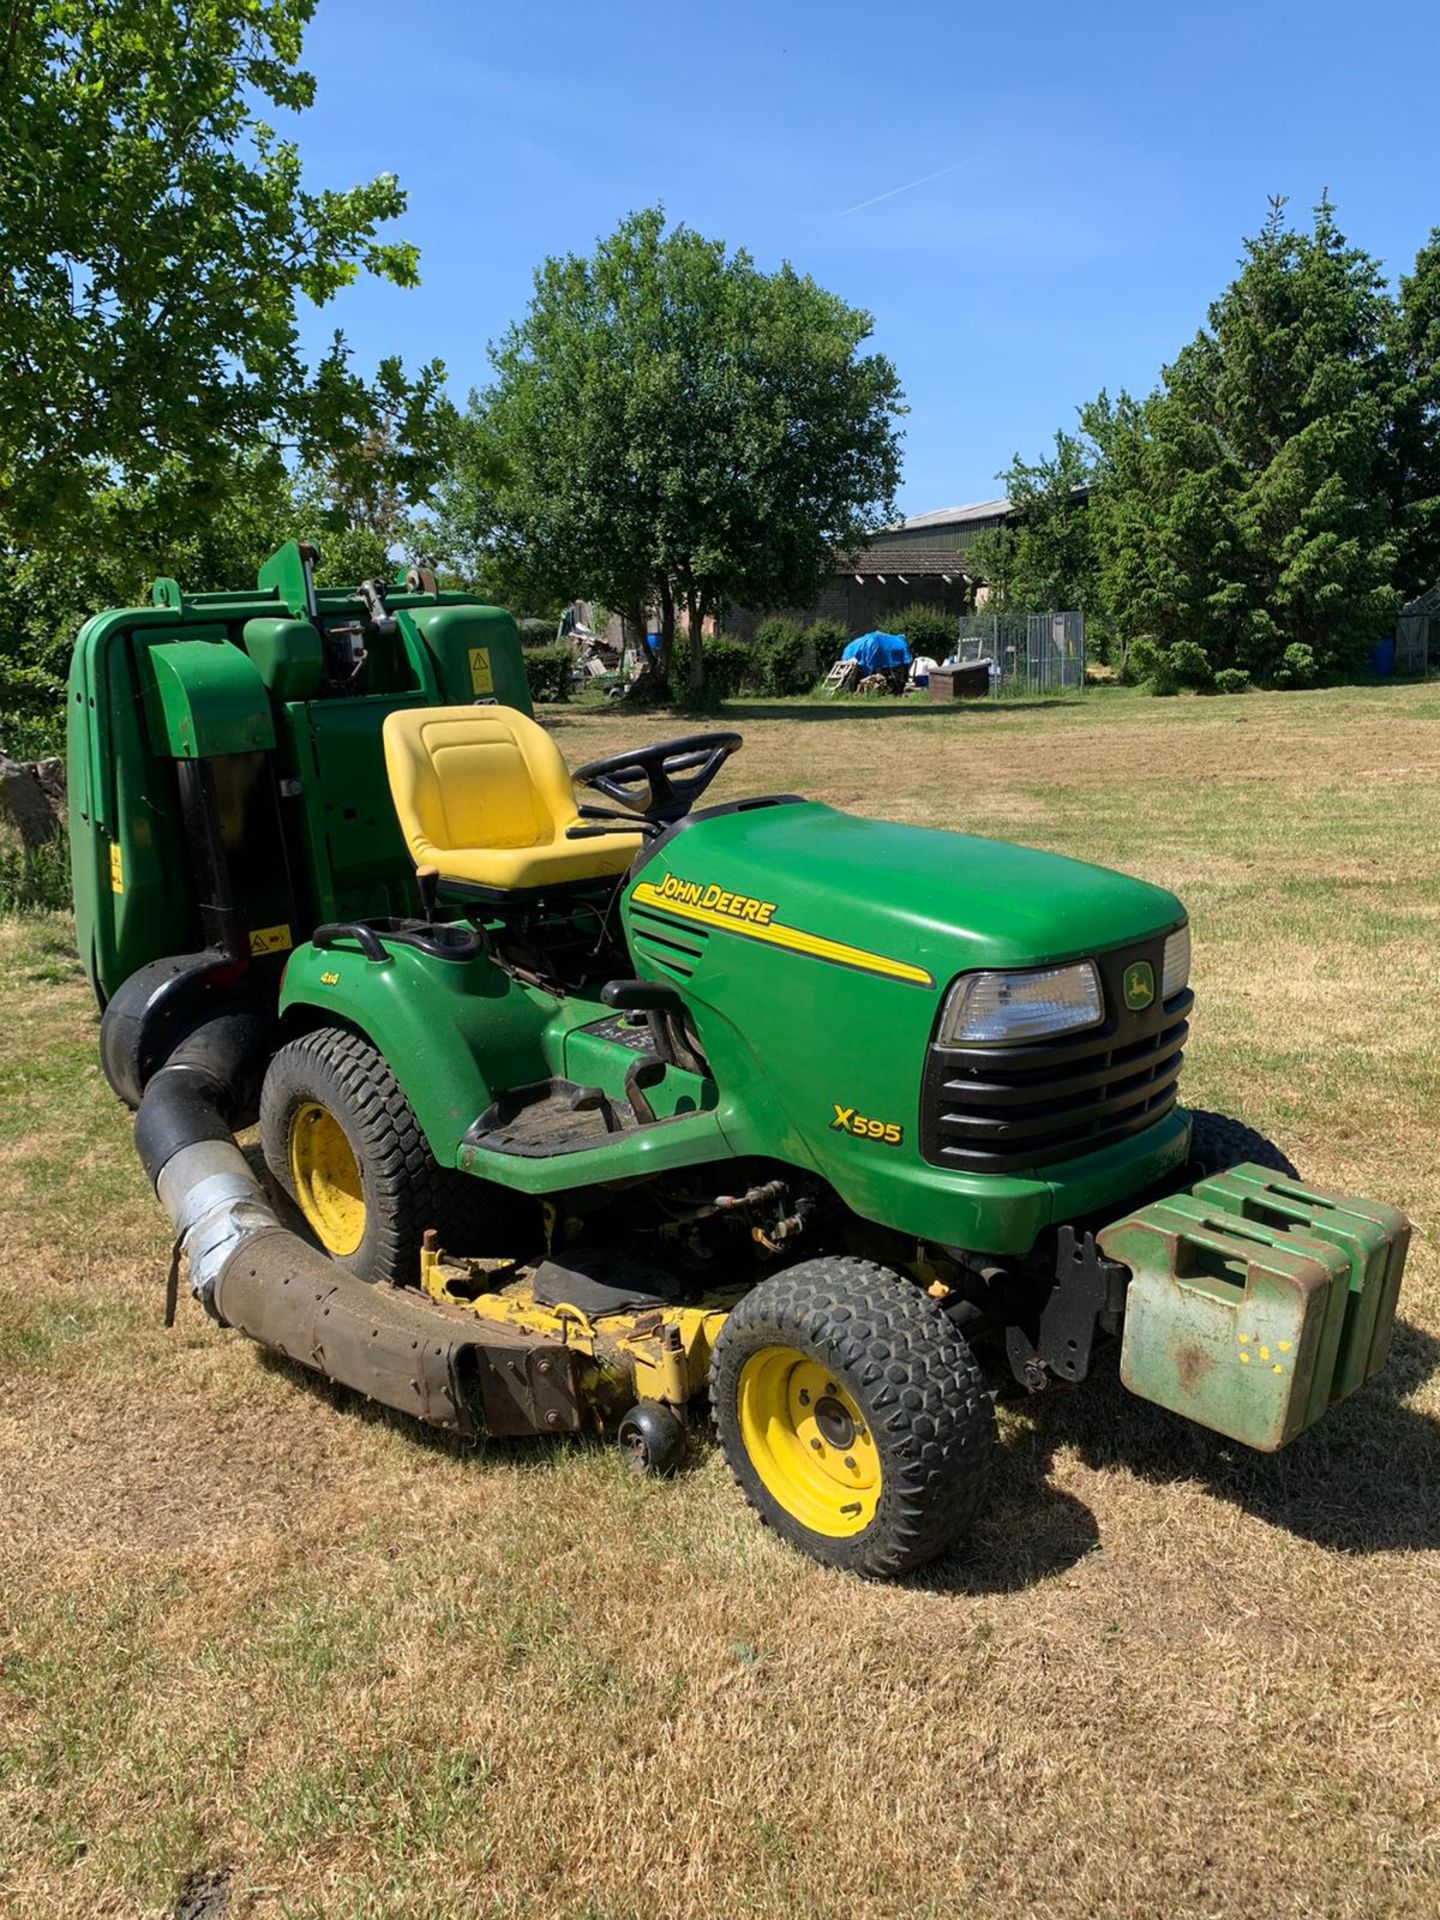 JOHN DEERE X595 RIDE ON LAWN MOWER, RUNS, DRIVES AND CUTS, 2080 HOURS, FRONT WEIGHTS *PLUS VAT* - Image 13 of 16